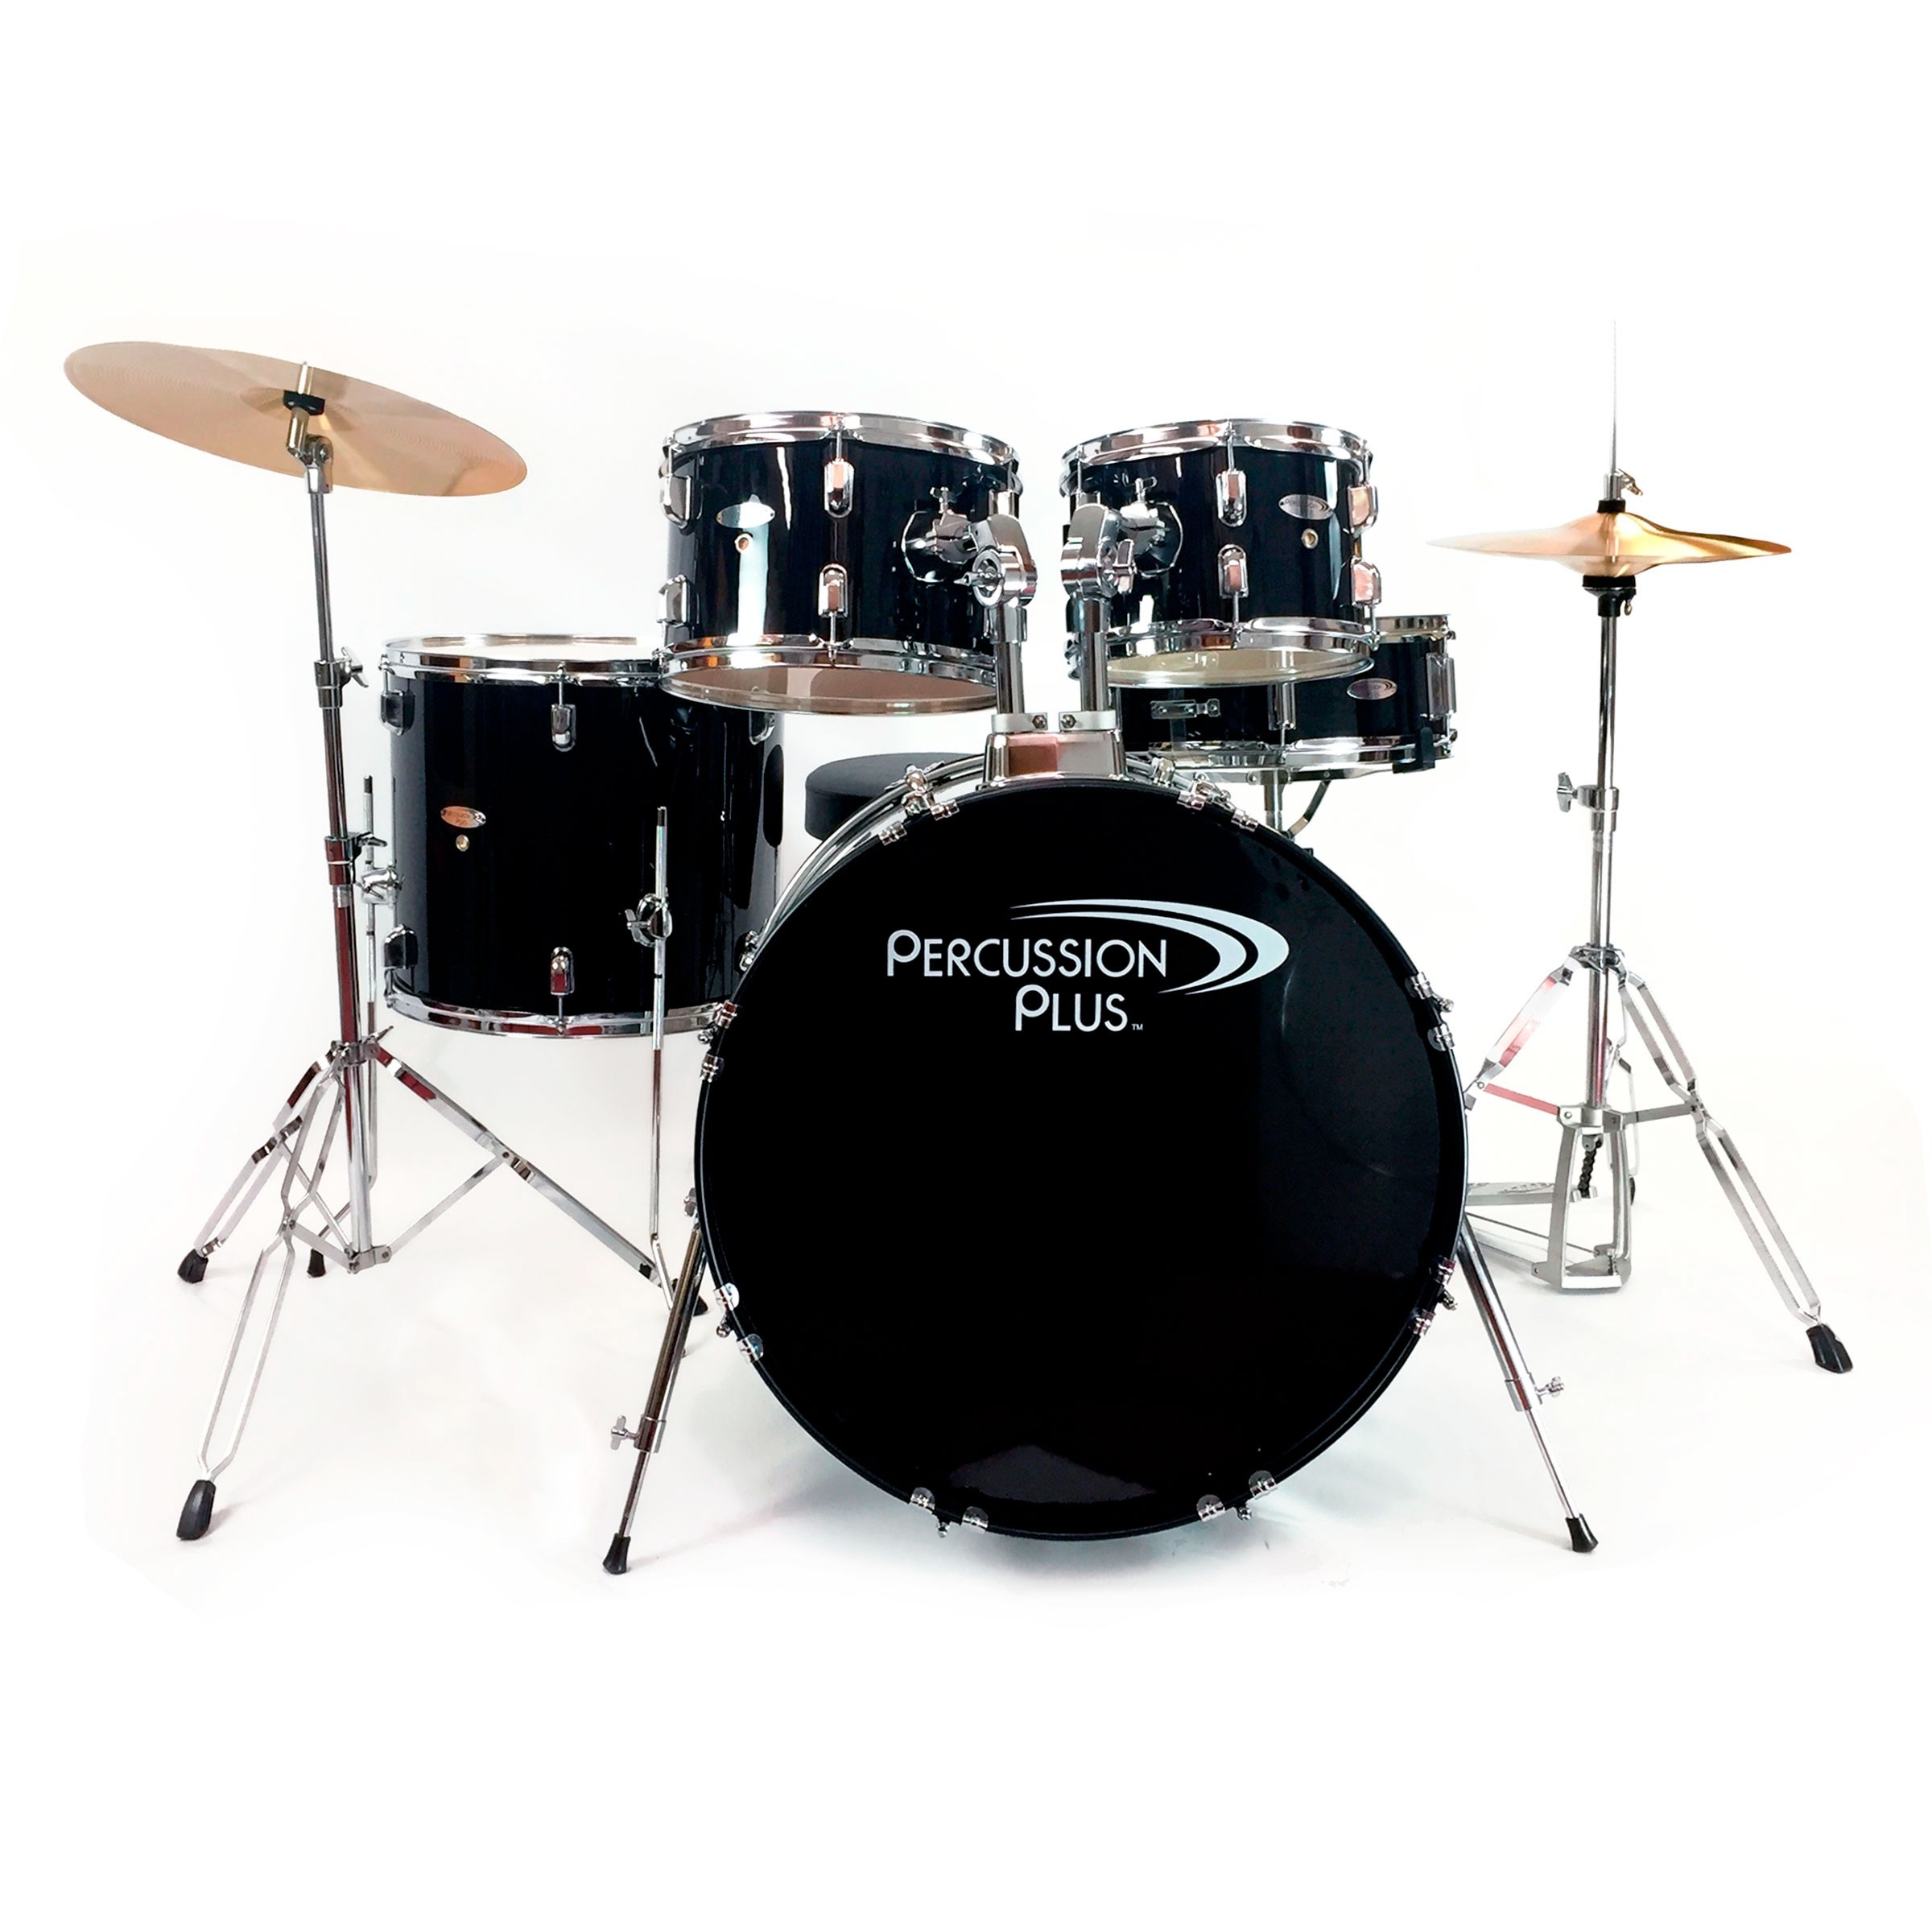 Percussion Plus 5pc Drumset w/ Hardware and Cymbals Drums on SALE